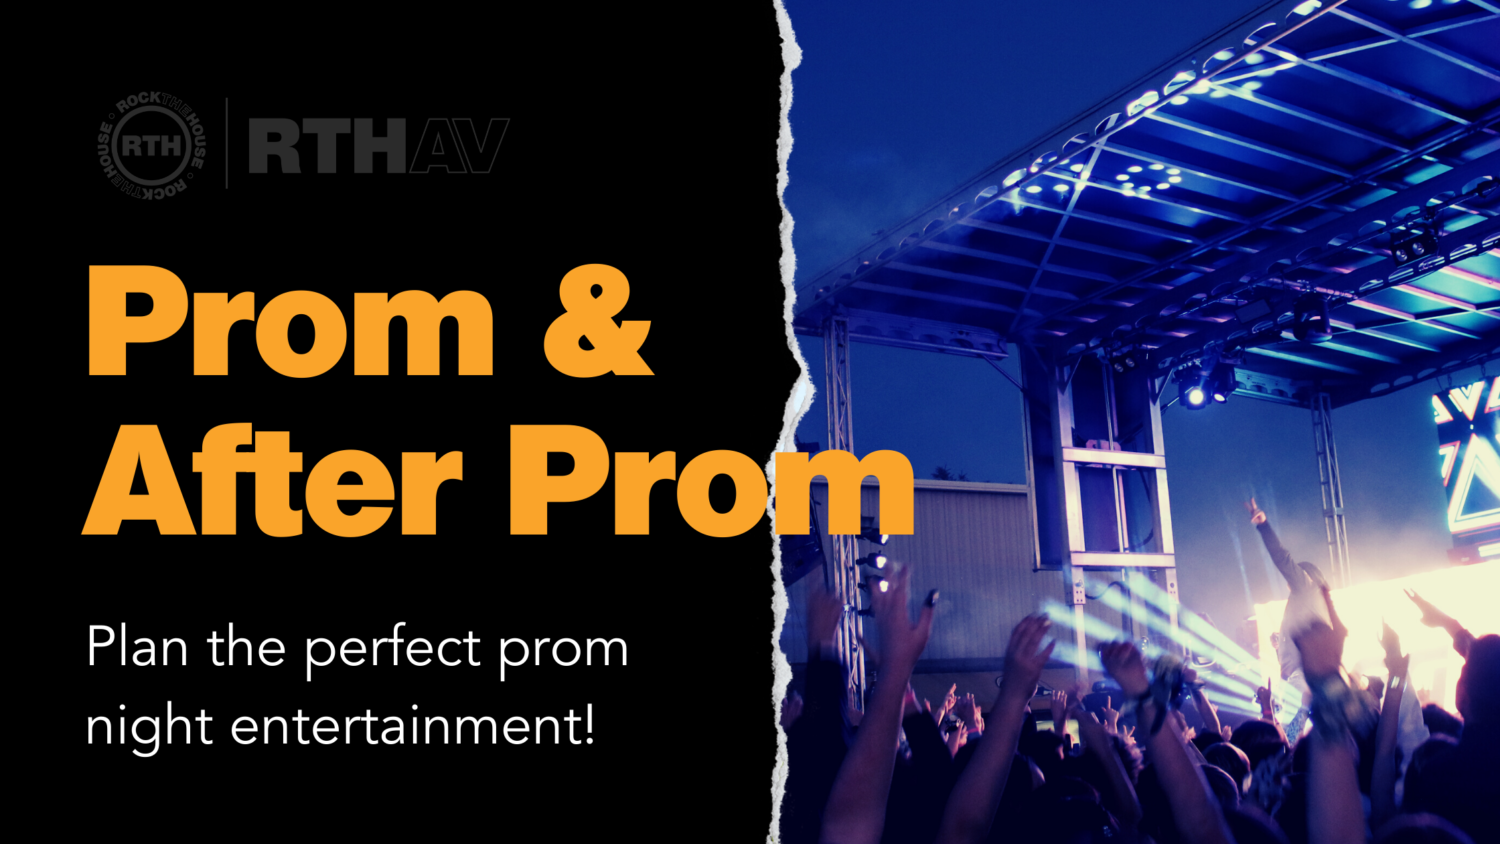 Prom & After Prom: Plan the perfect prom night entertainment